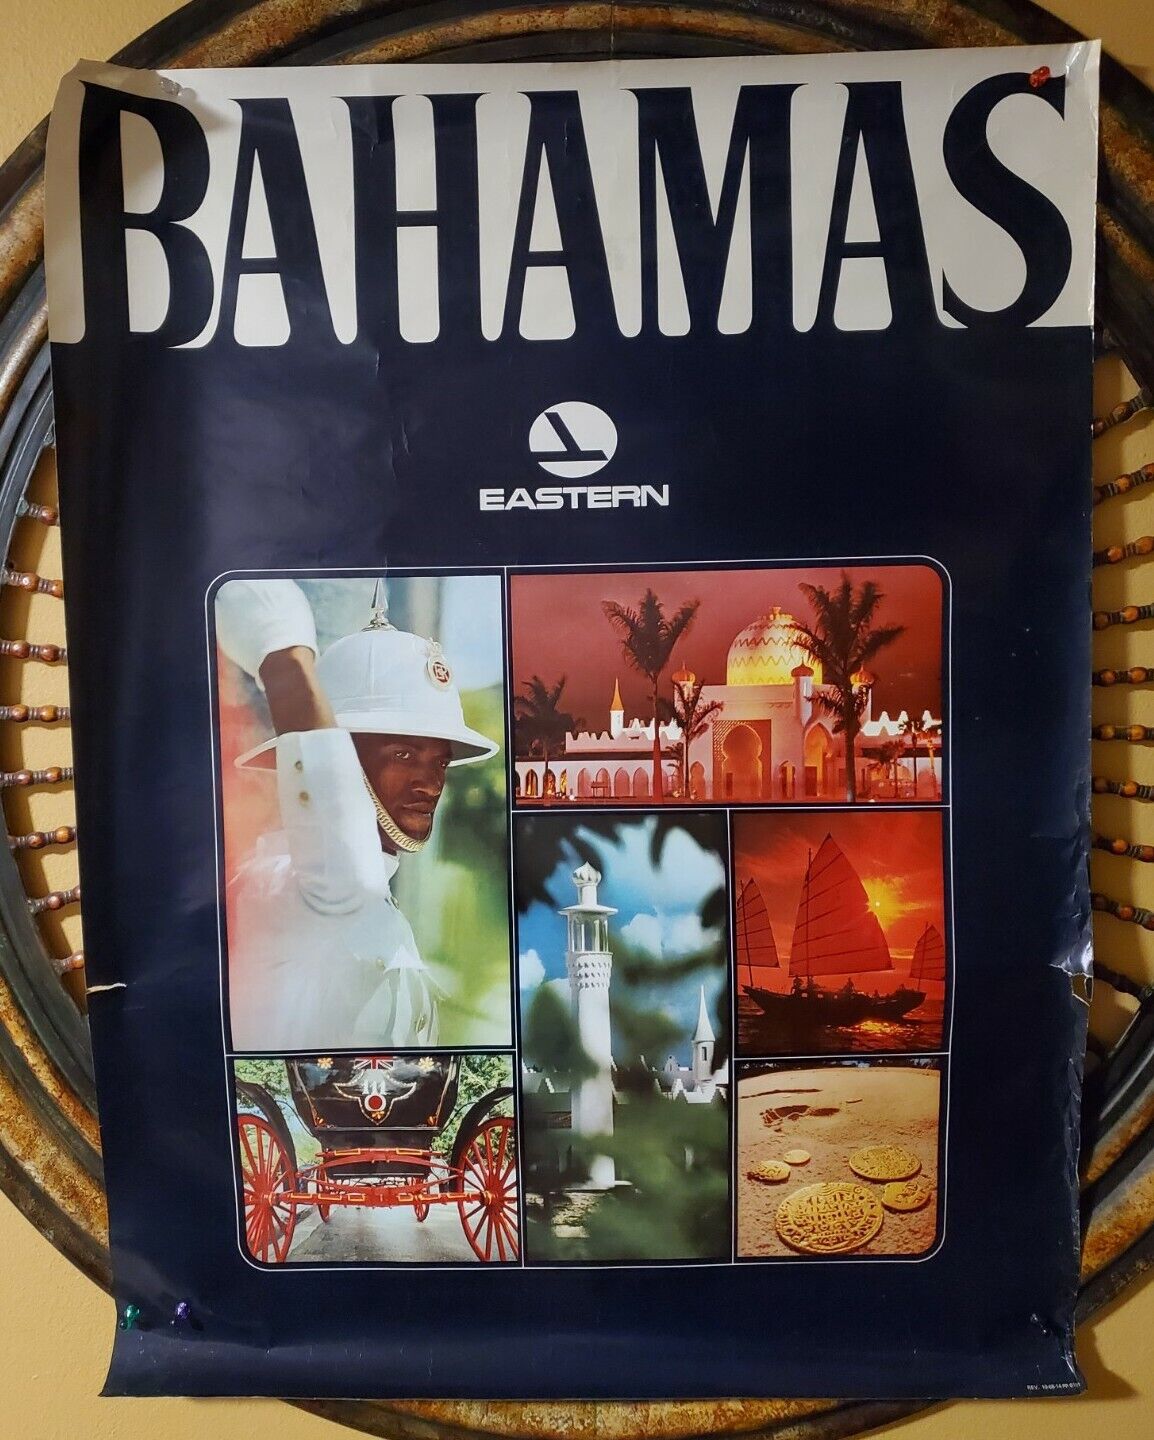 Vintage EASTERN AIRLINES BAHAMAS 1968 Travel Tourism Poster ~ 30x40 